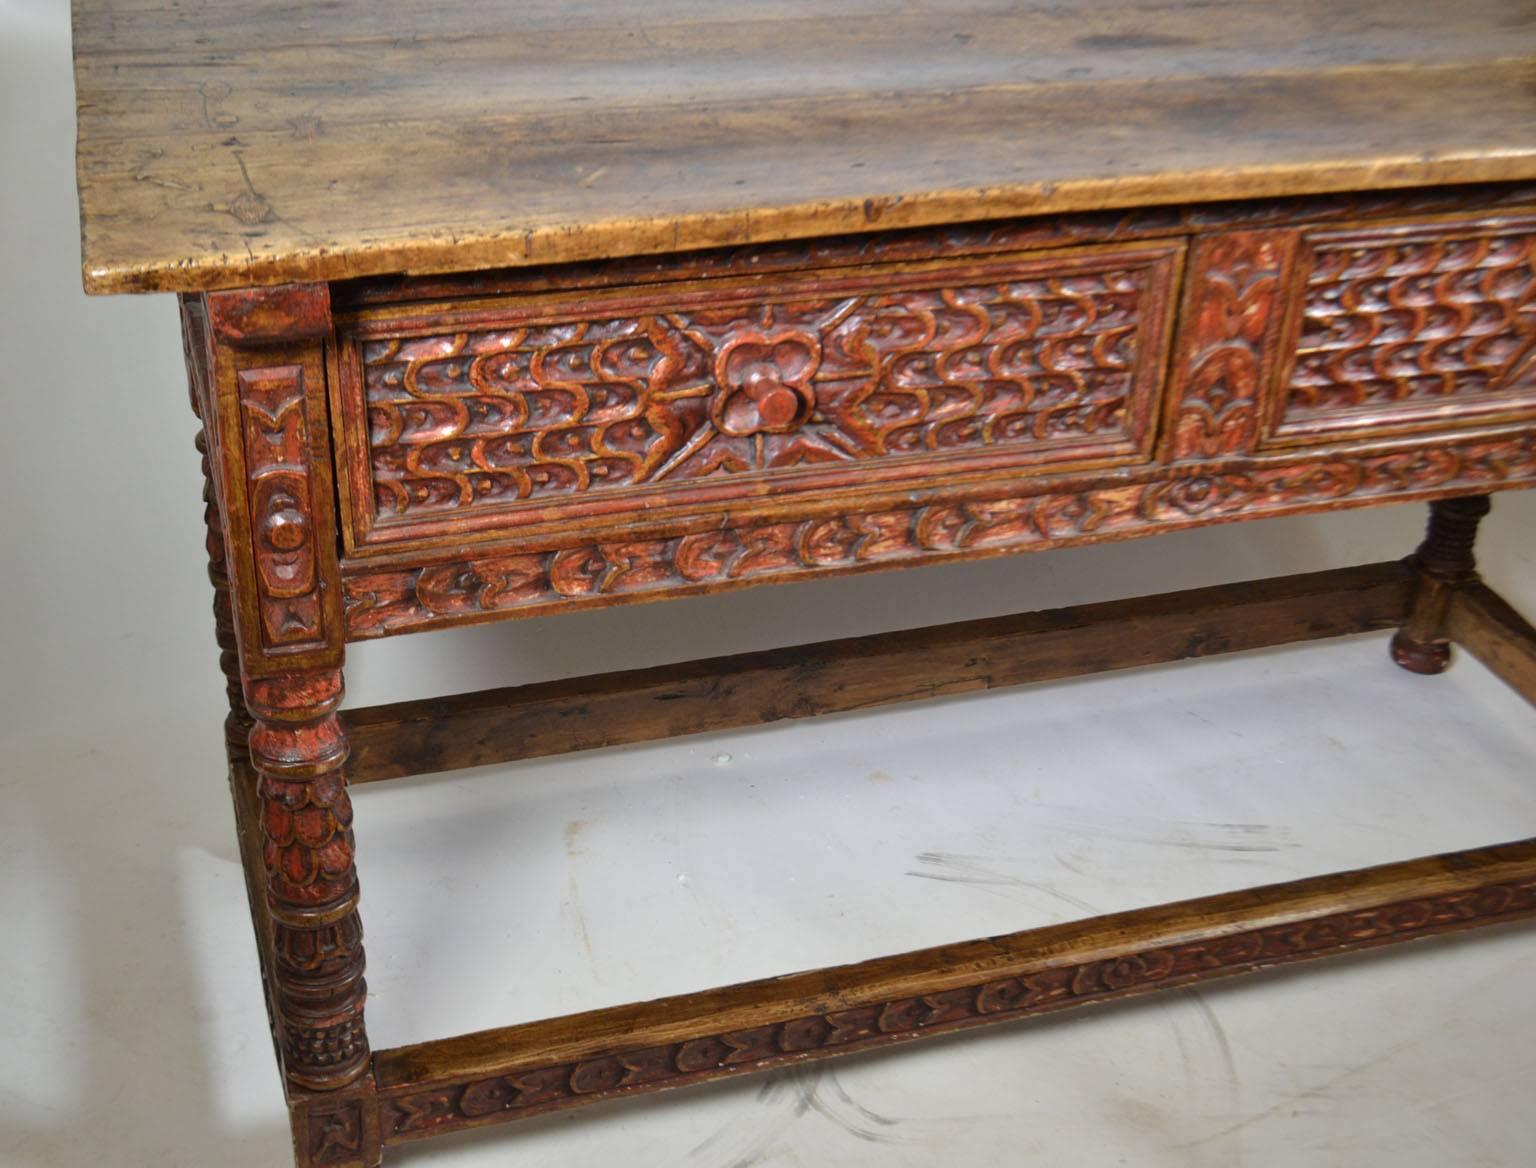 18th century polychrome, Spanish colonial console table, with two drawers, turned legs, fish tail carving surrounding typical Spanish carved rosettes, a beautiful planked top, resting on a box stretcher and ball feet; Peru.